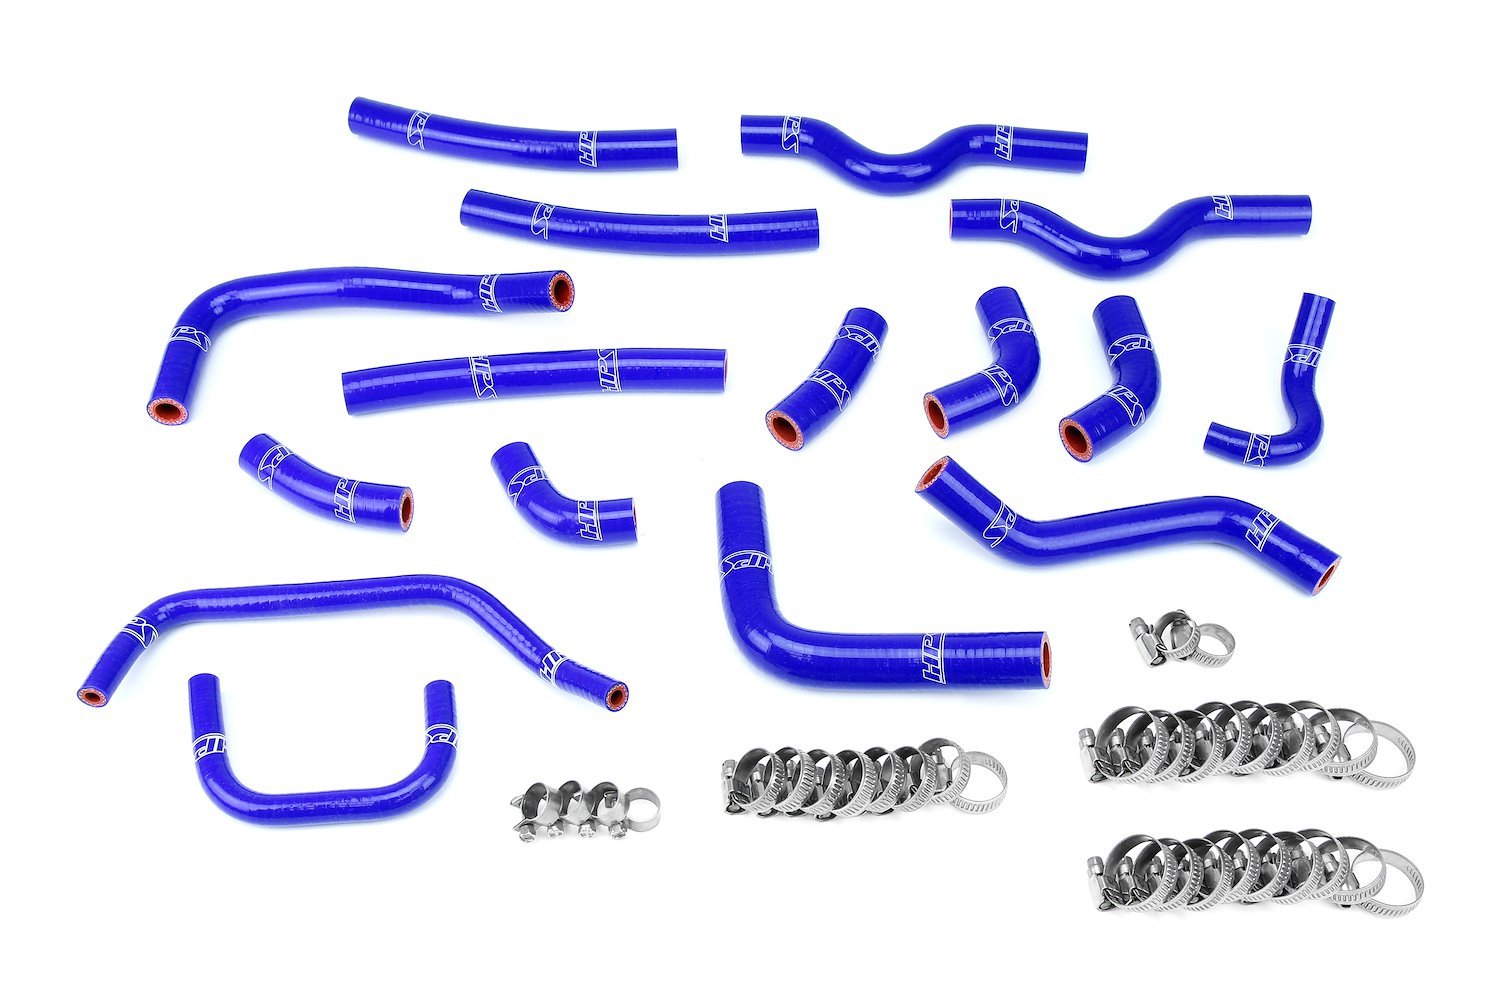 57-1911-BLUE Coolant Hose Kit, 3-Ply Reinforced Silicone, Replaces Rubber Heater & Bypass Coolant Hoses